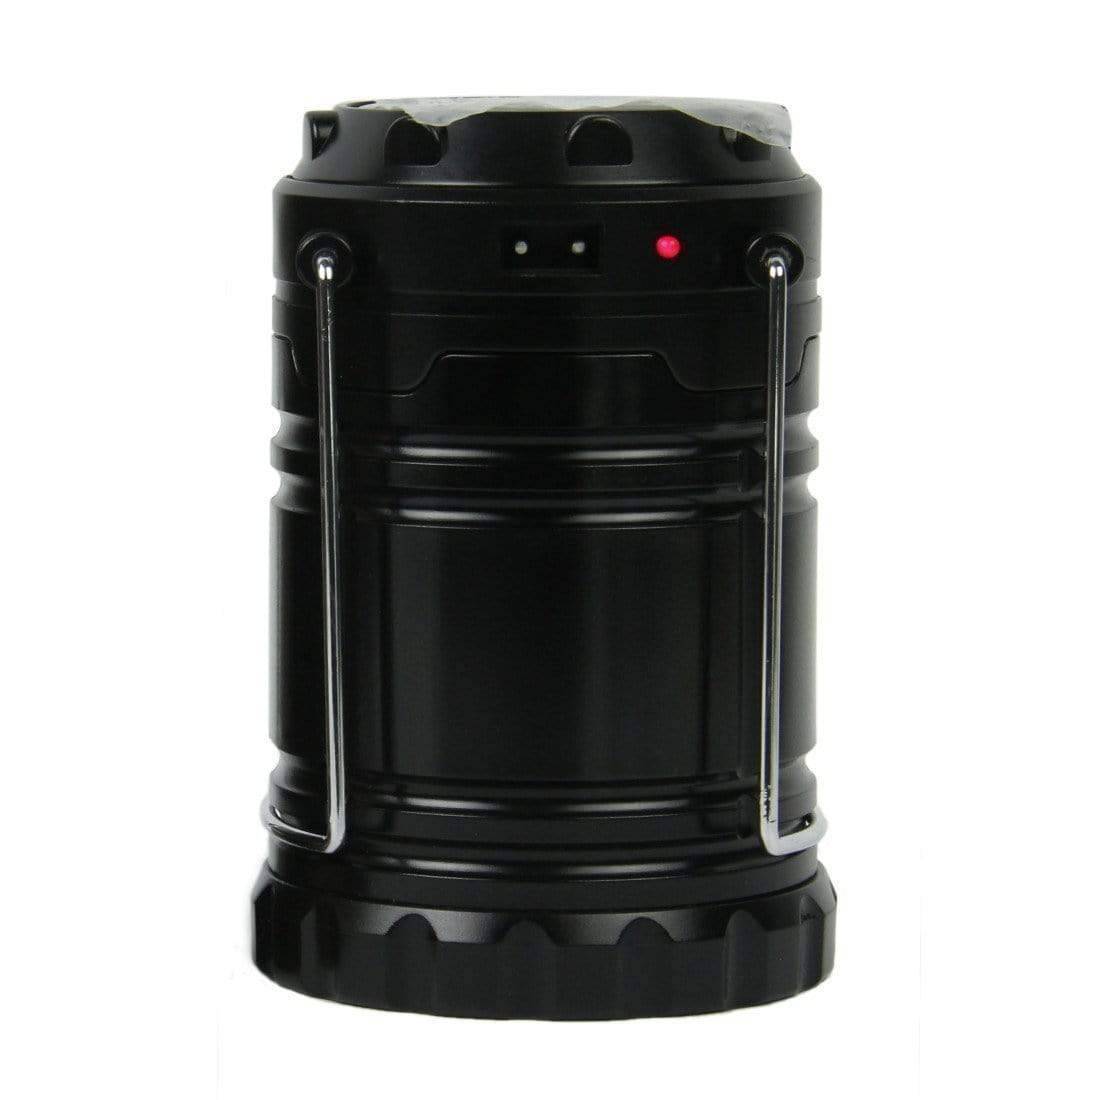 Survival Gears Depot Survival Gears Black Collapsible LED Camping Lantern